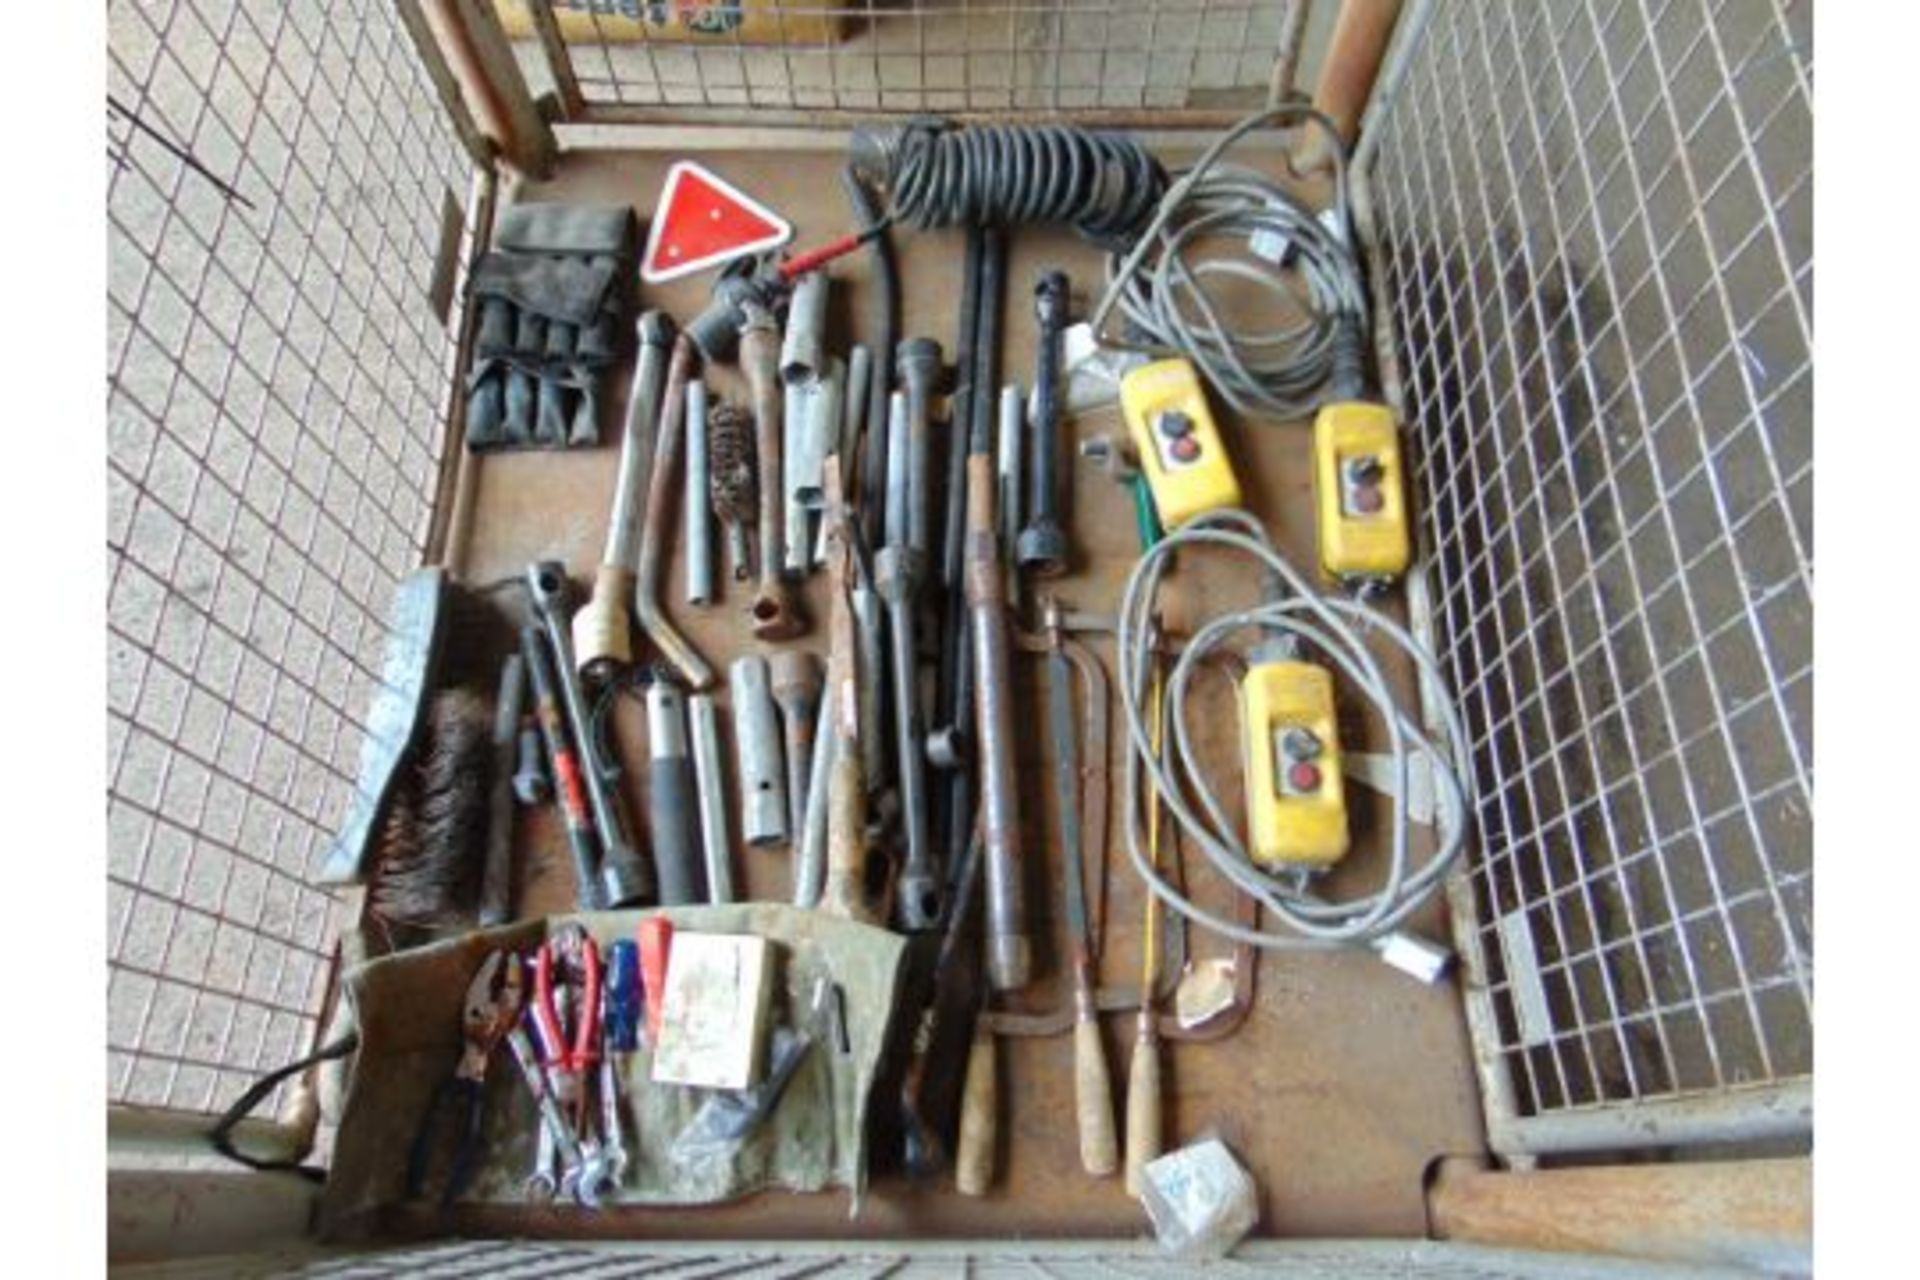 Stillage of Tools, Remote Controls, Trailer Electrical Connectors Etc - Image 4 of 4